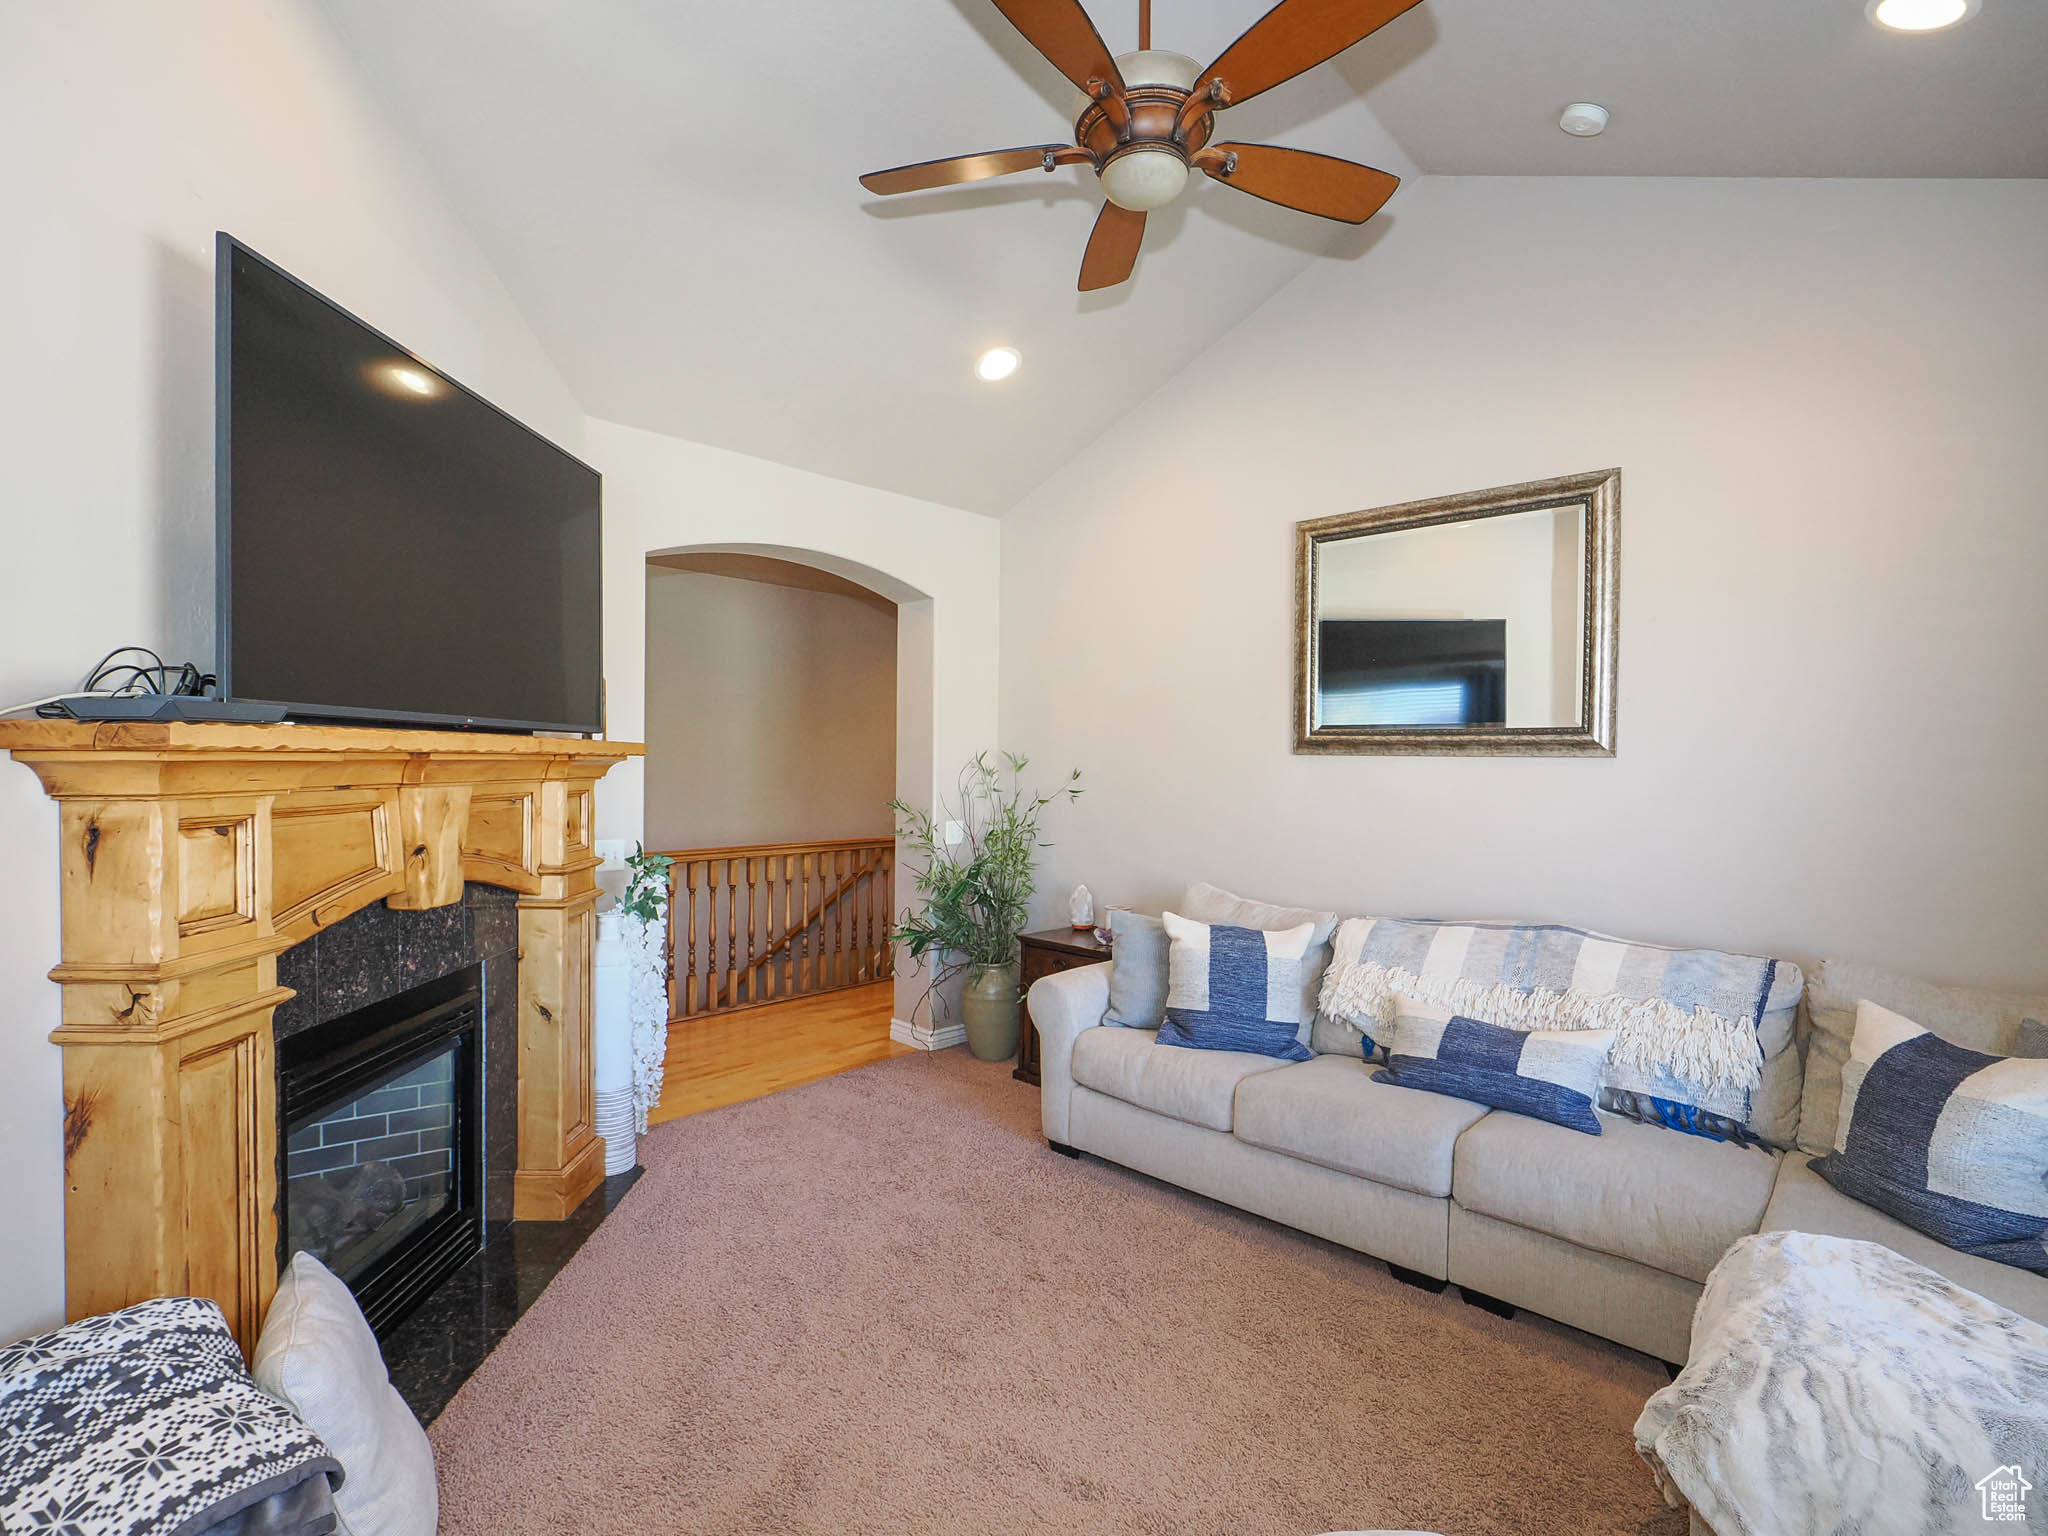 Carpeted family room with lofted ceiling, ceiling fan, and a premium gas fireplace